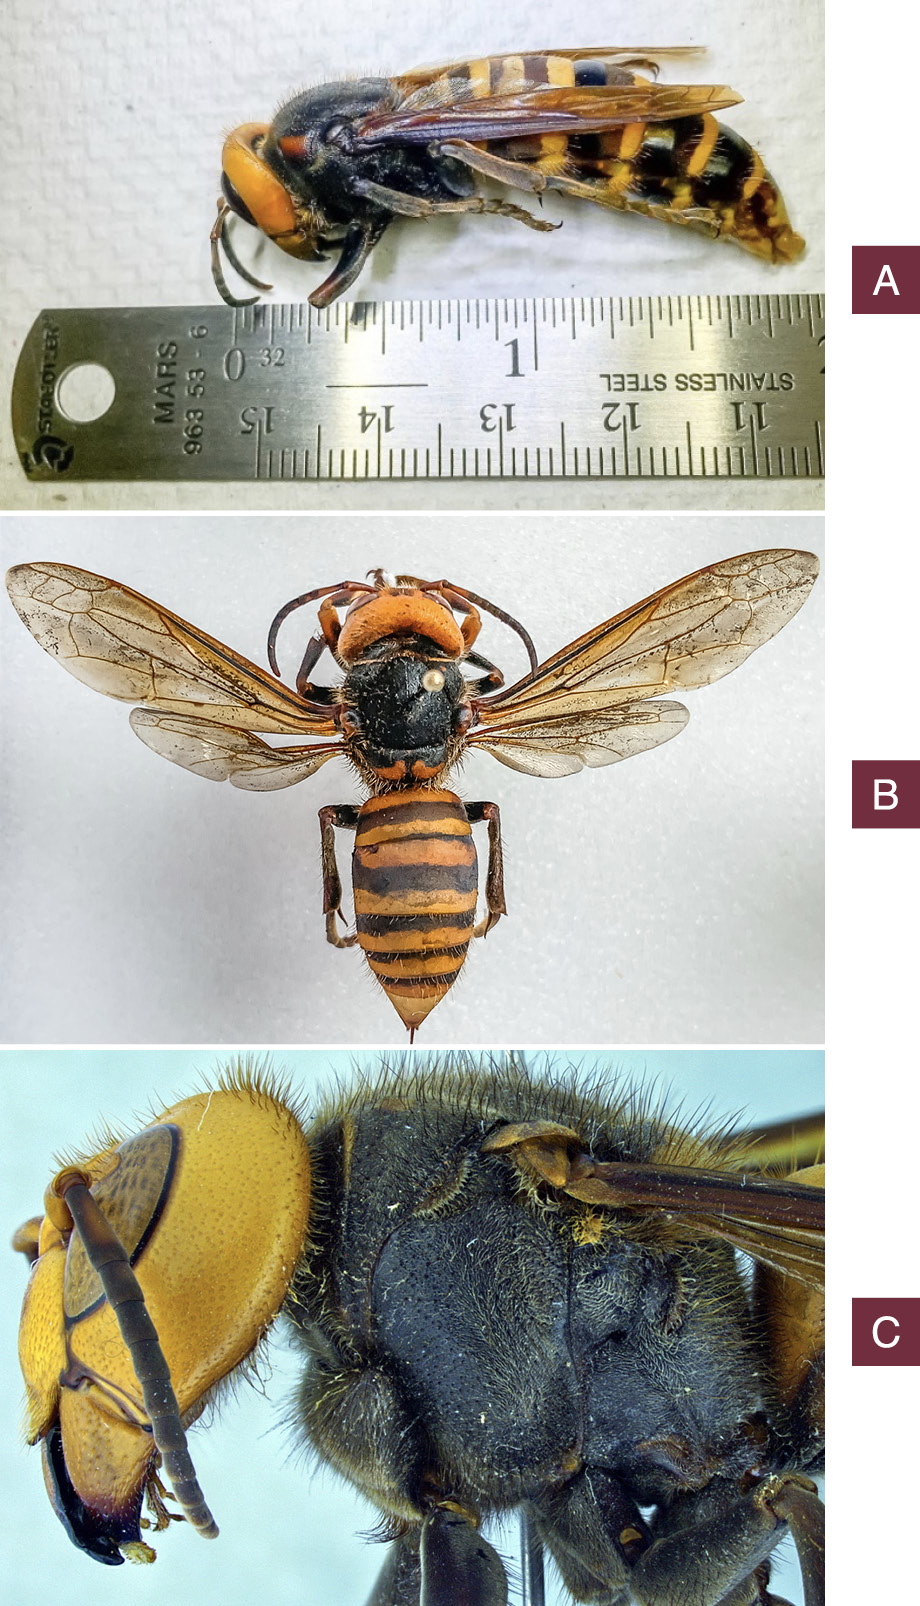 Northern giant hornet specimen measured with a ruler. The topside of a pinned northern giant hornet specimen. Close-up, side profile of the northern giant hornet.